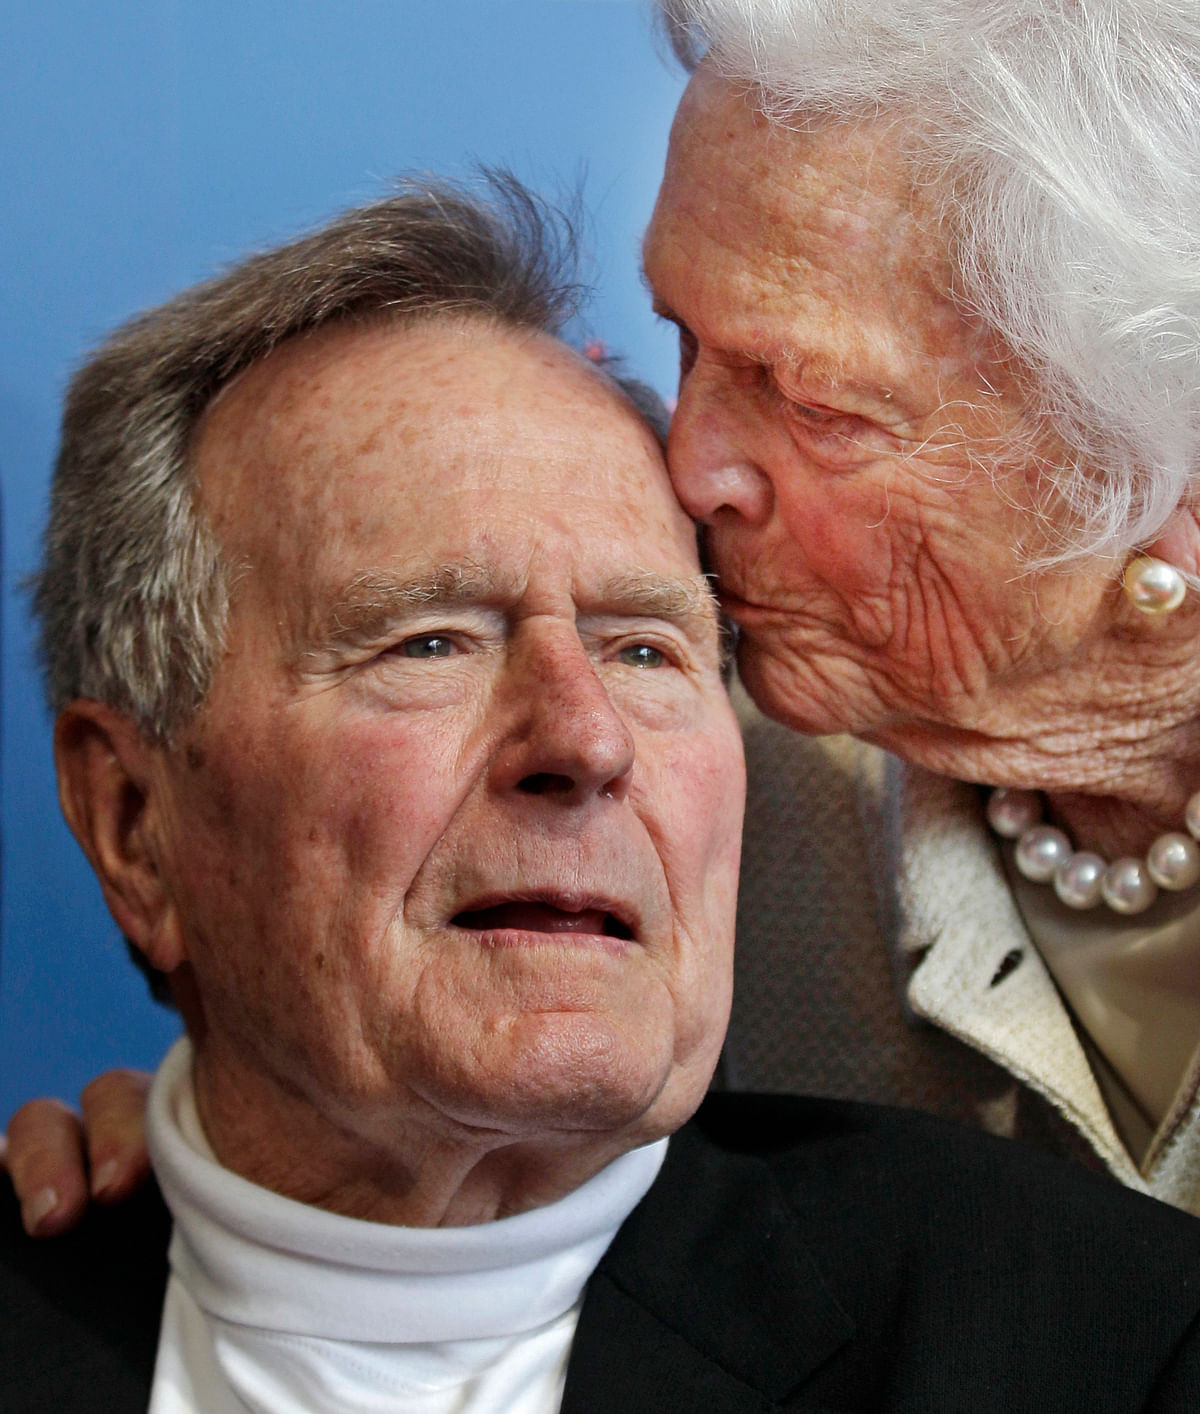 Bush died shortly after 10 pm on Friday, 30 November, about 8 months after the death of his wife, Barbara Bush.